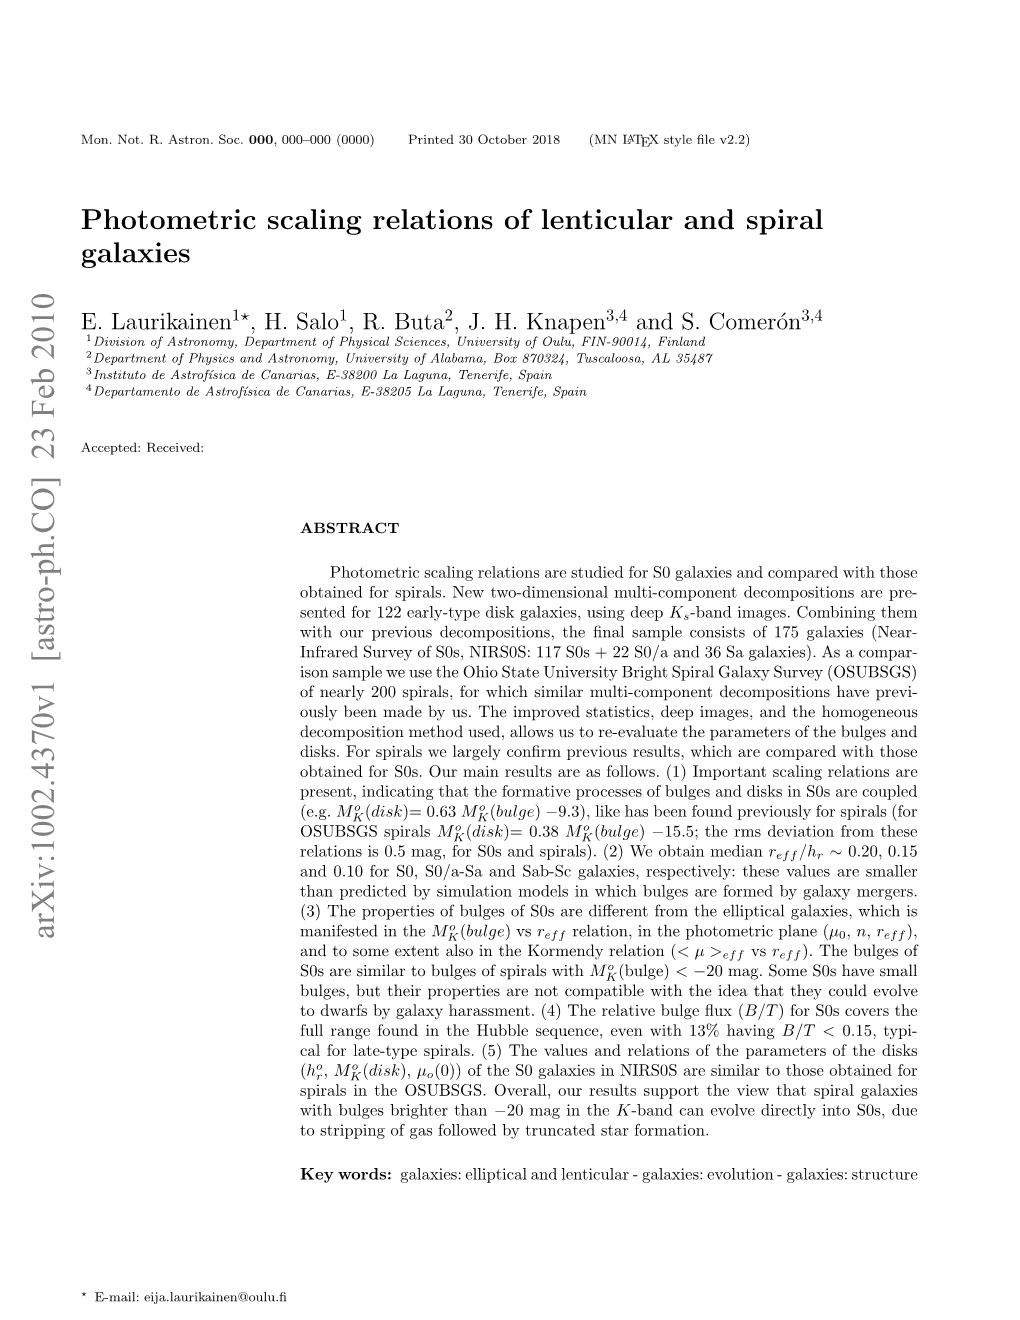 Photometric Scaling Relations of Lenticular and Spiral Galaxies